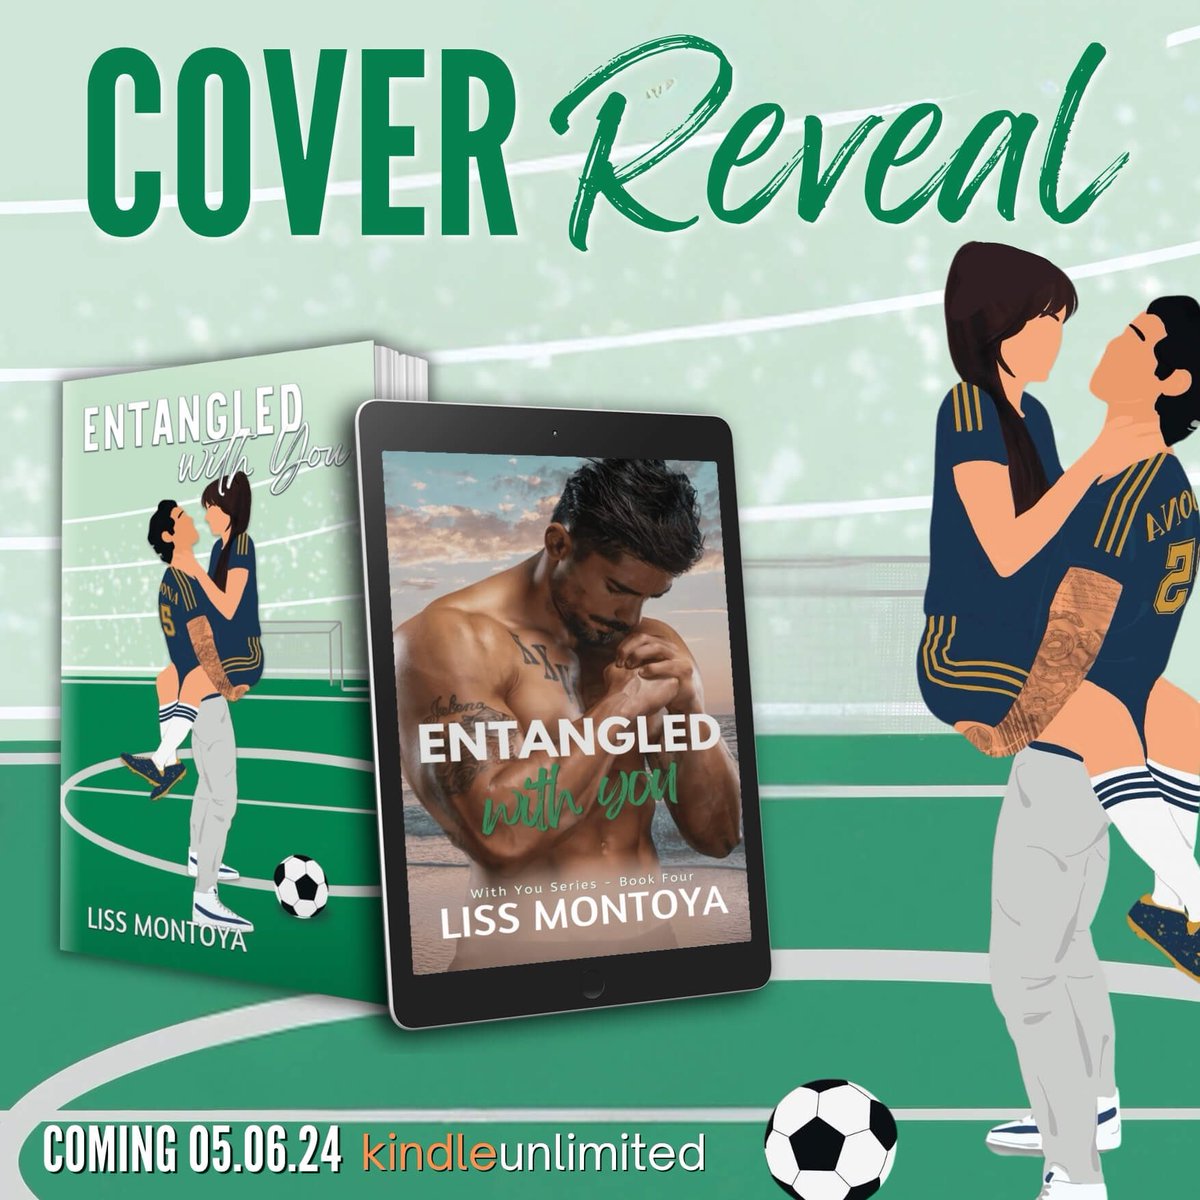 The way I’m obsessed with the covers for my upcoming book 😍😍😍

Preorder here:
amzn.to/43TrM74

ARC signups:
bit.ly/entangledwyous…

#coverreveal #lissmontoya #bookaholic #forbiddenromance #onlinedating #secretromance #sportsromance #kindleunlimited #arcsignup #arc